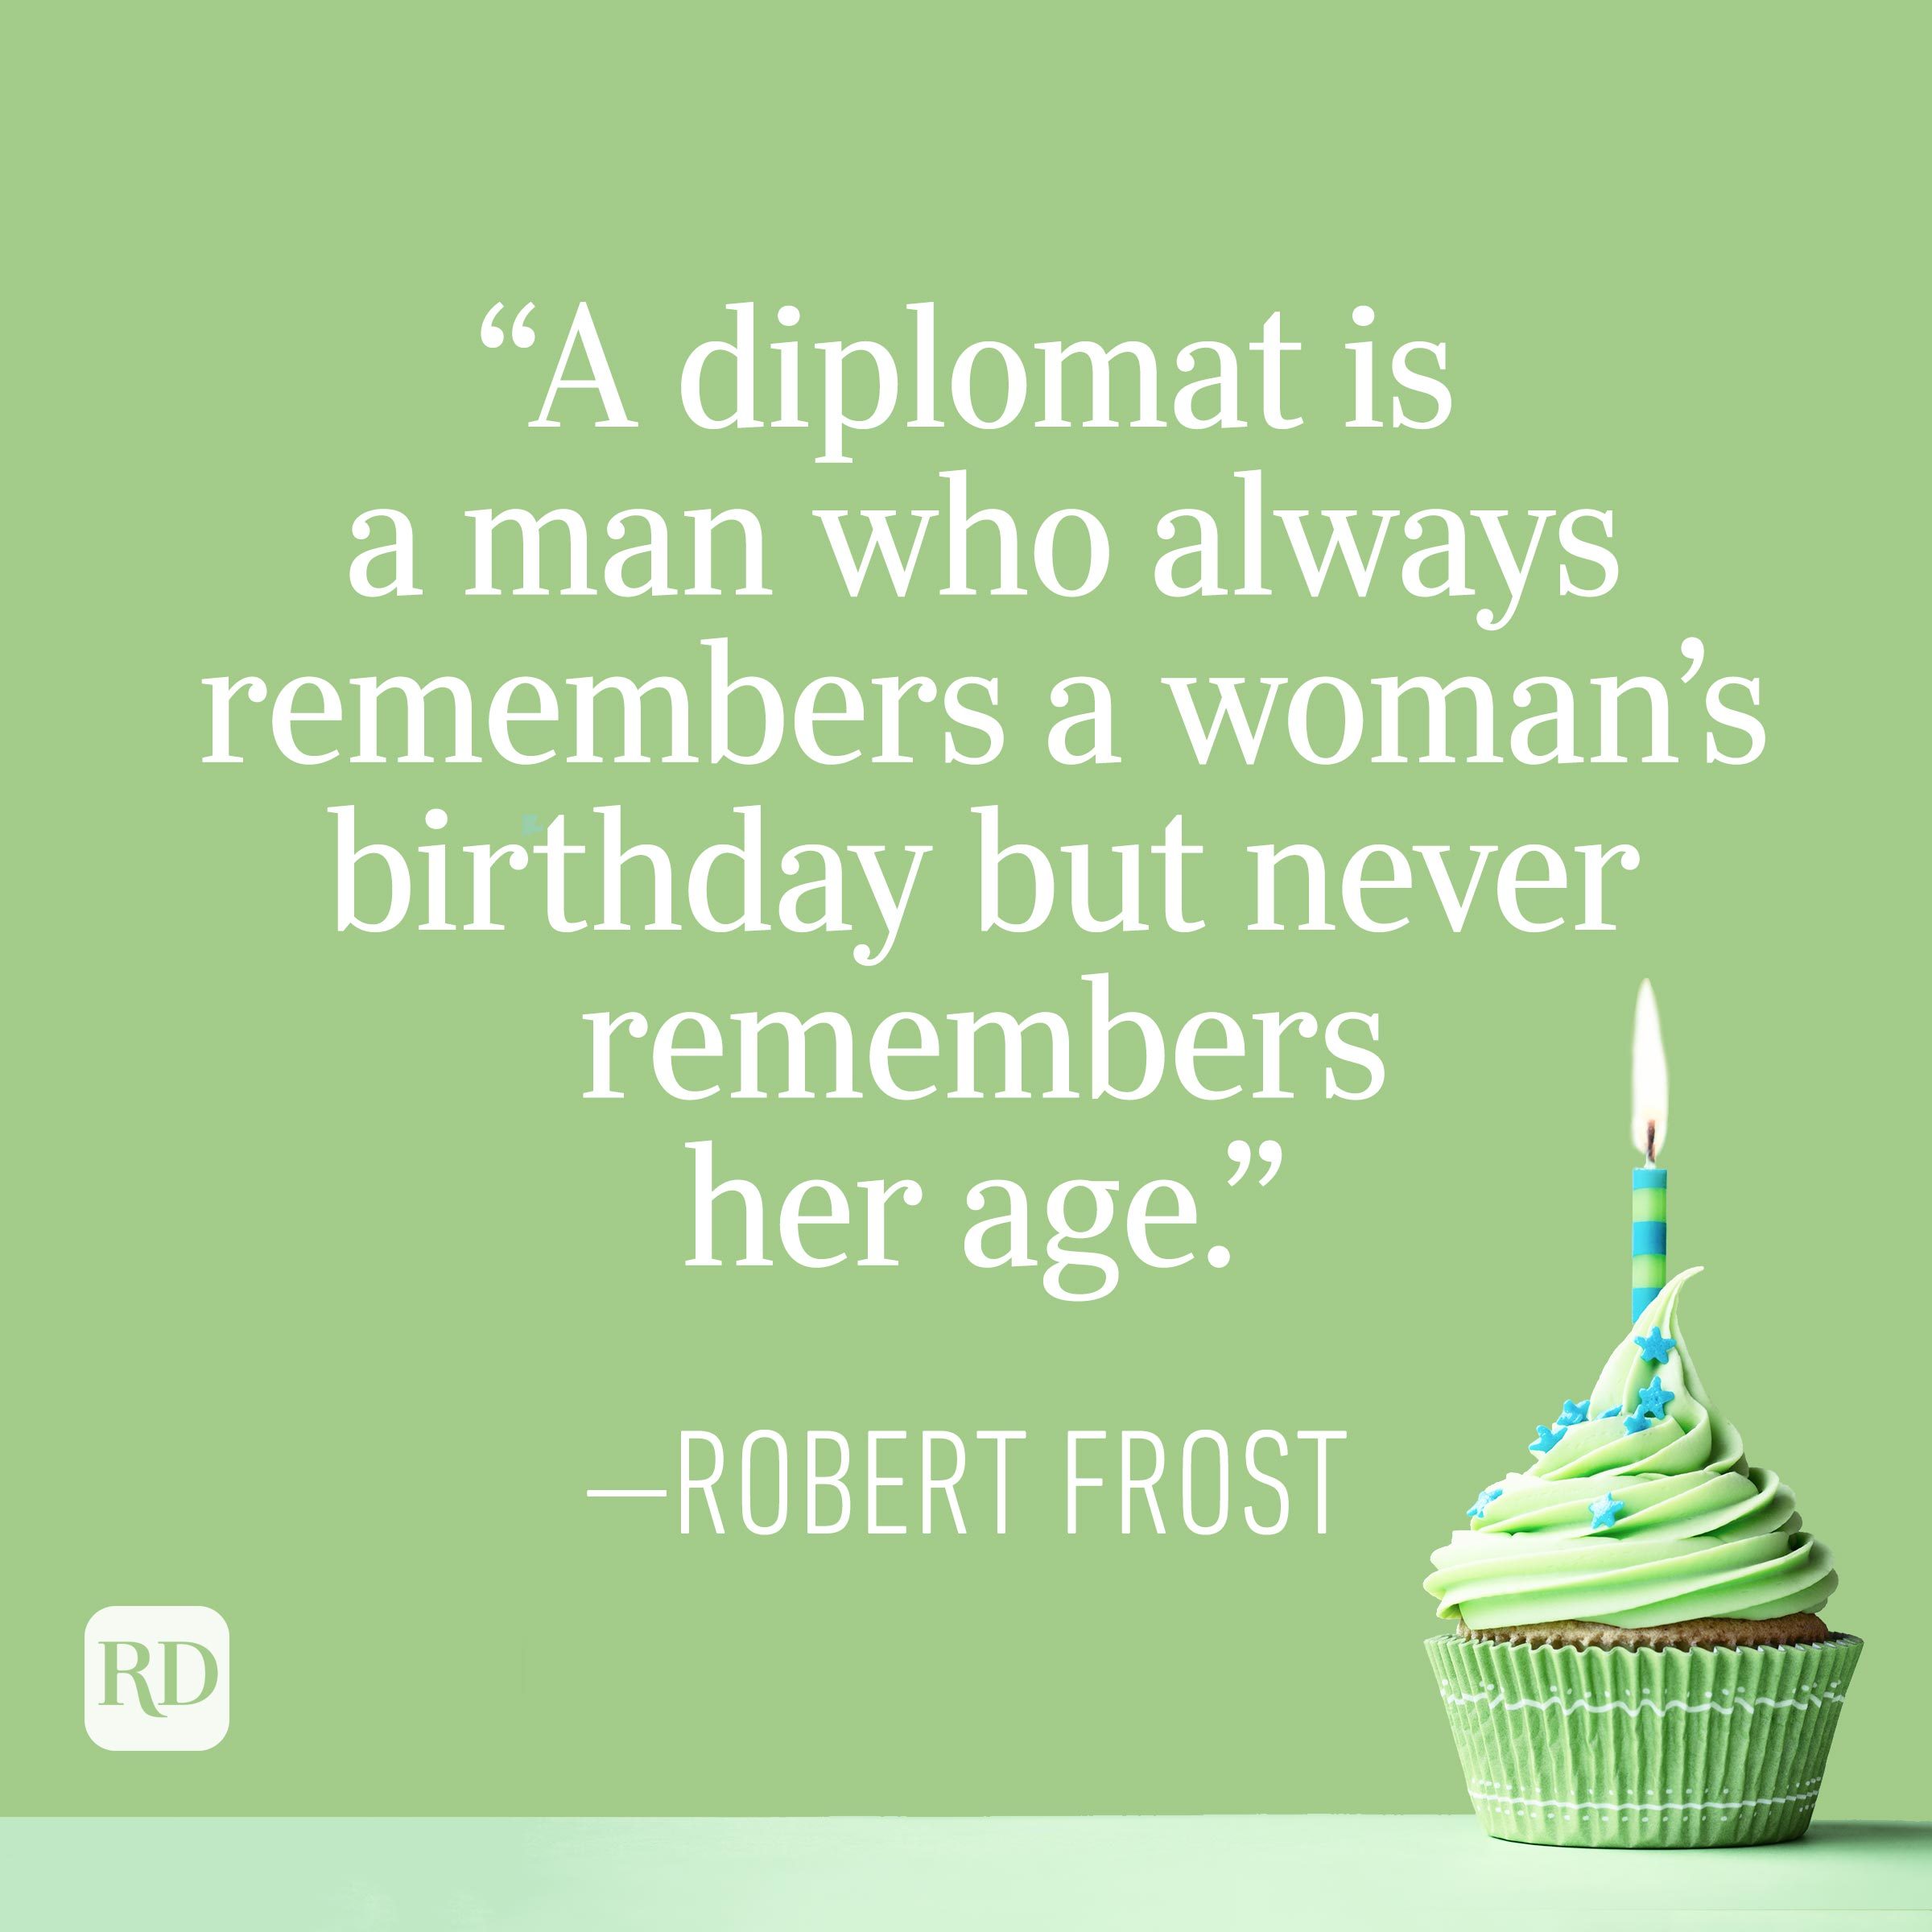 "A diplomat is a man who always remembers a woman's birthday but never remembers her age." —Robert Frost